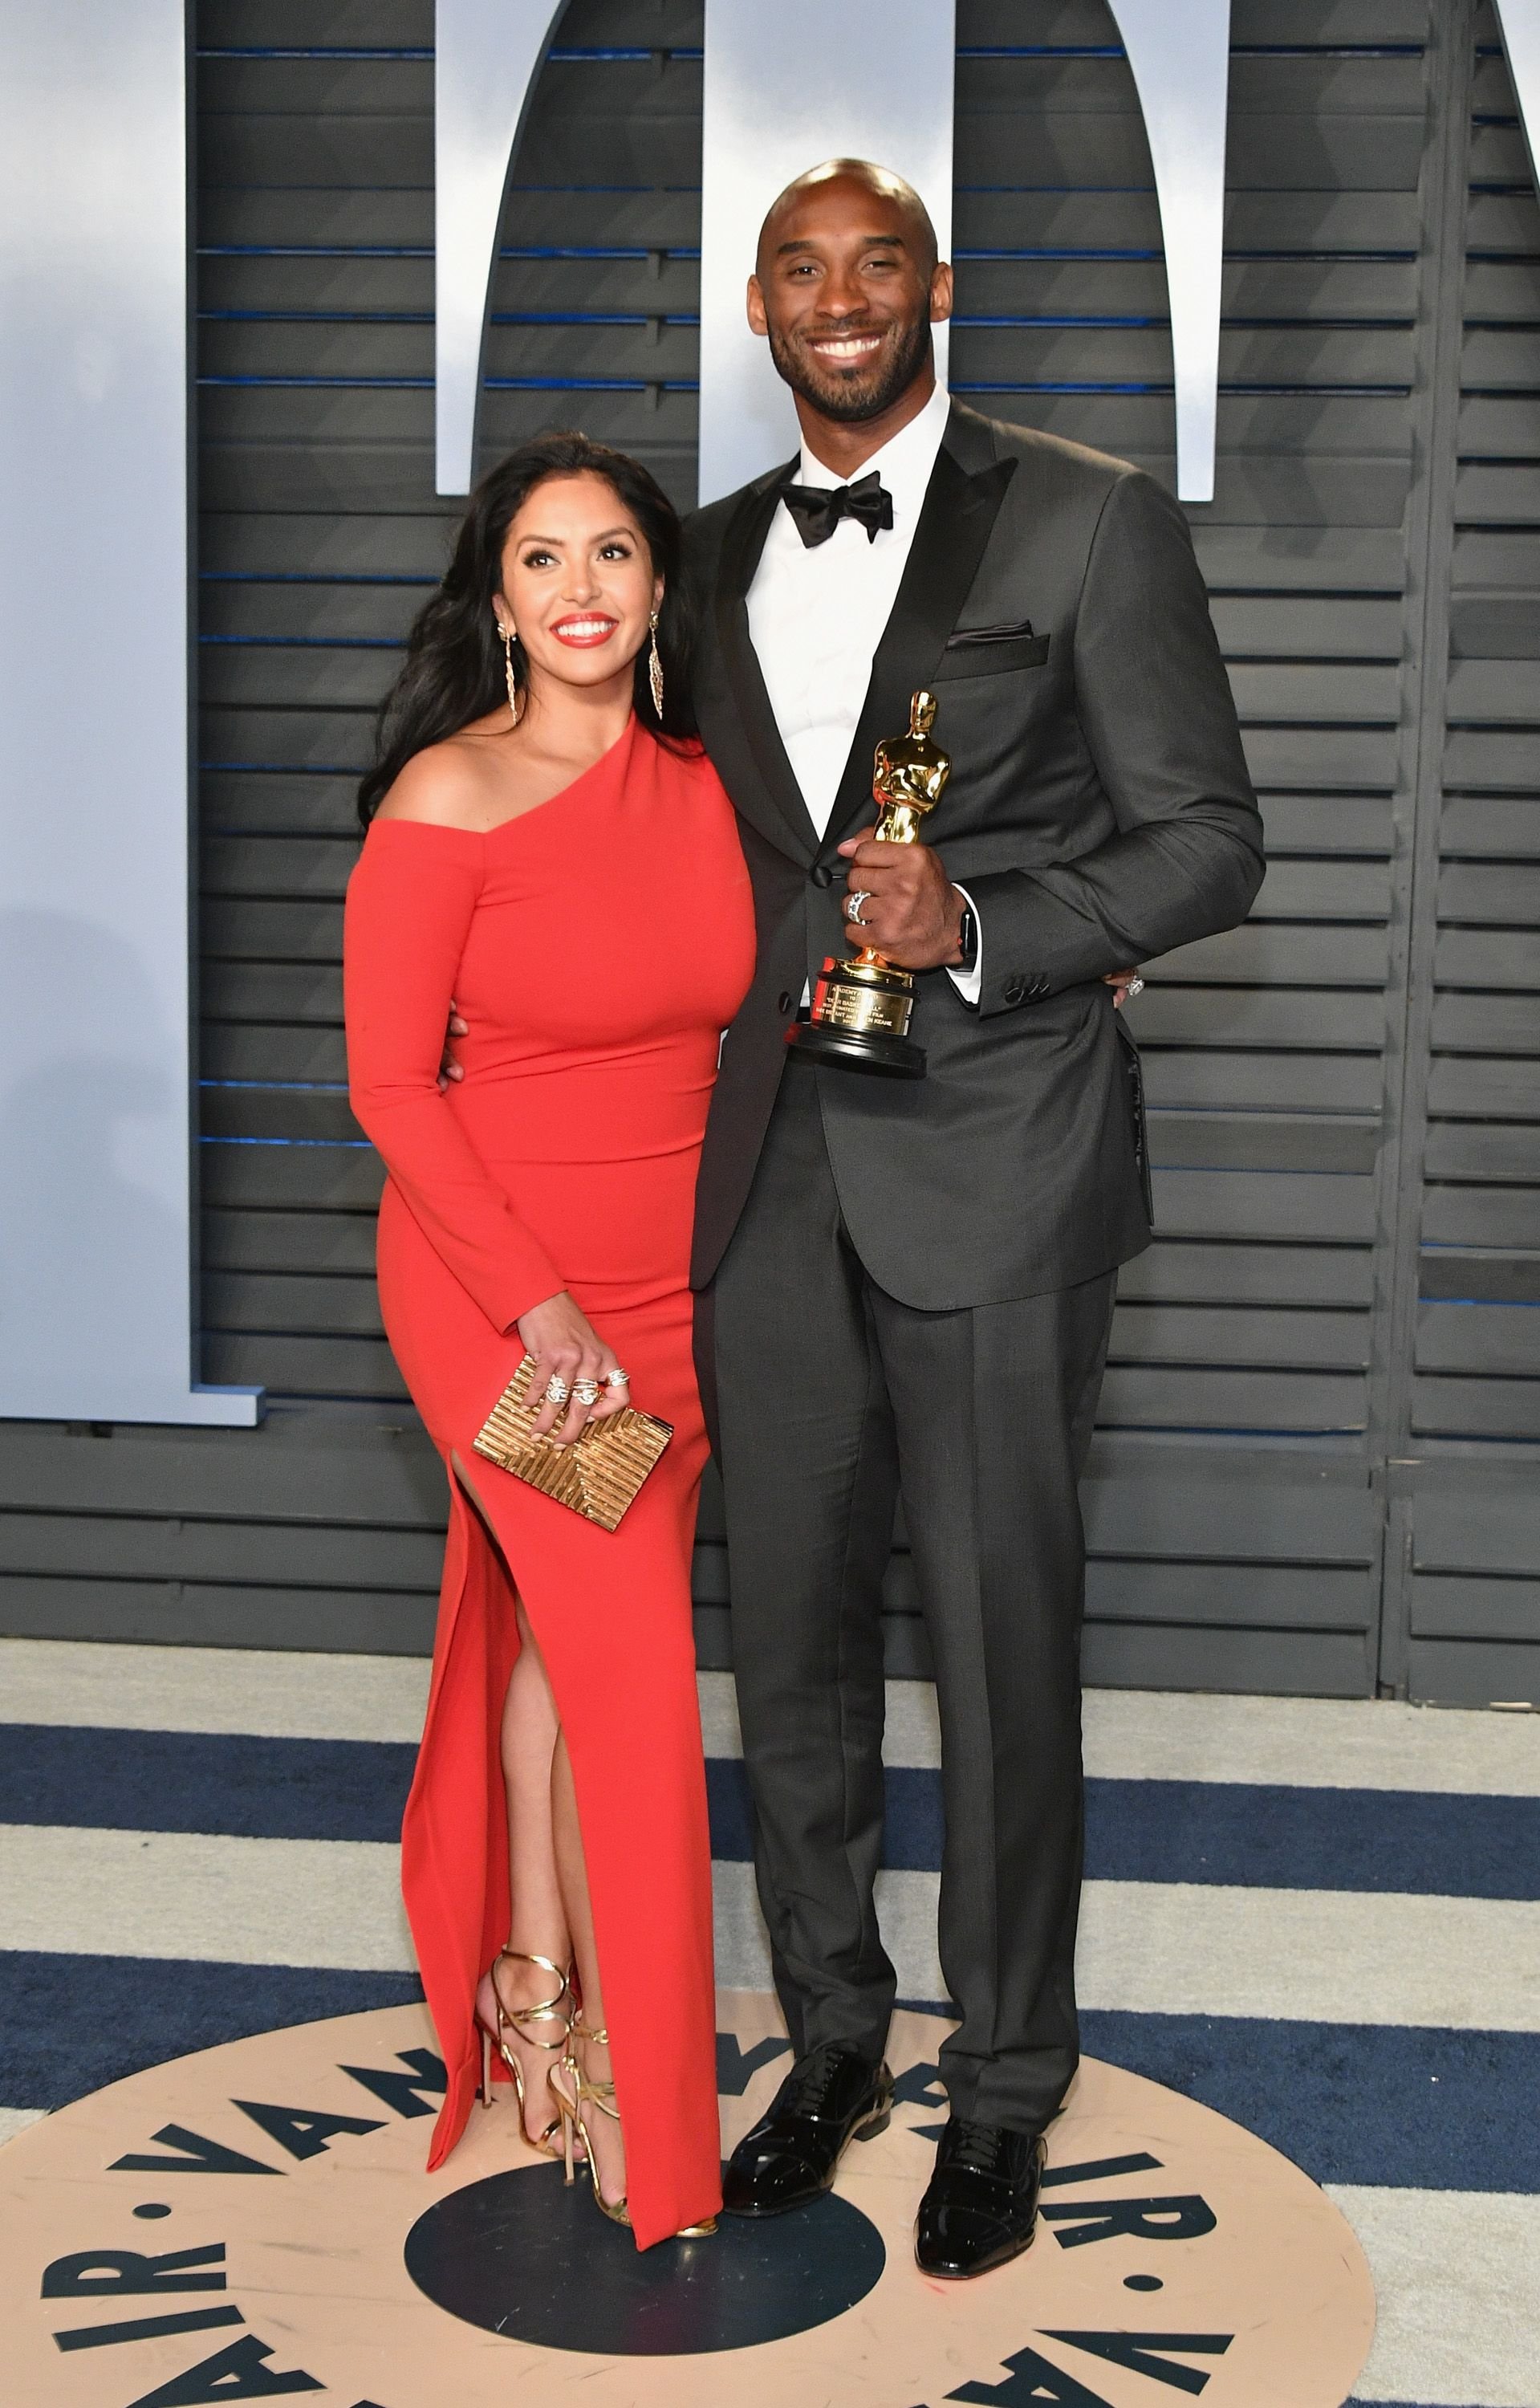 Vanessa Bryant and Kobe Bryant at the 2018 Vanity Fair Oscar Party at Wallis Annenberg Center for the Performing Arts on March 4, 2018 | Photo: Getty Images